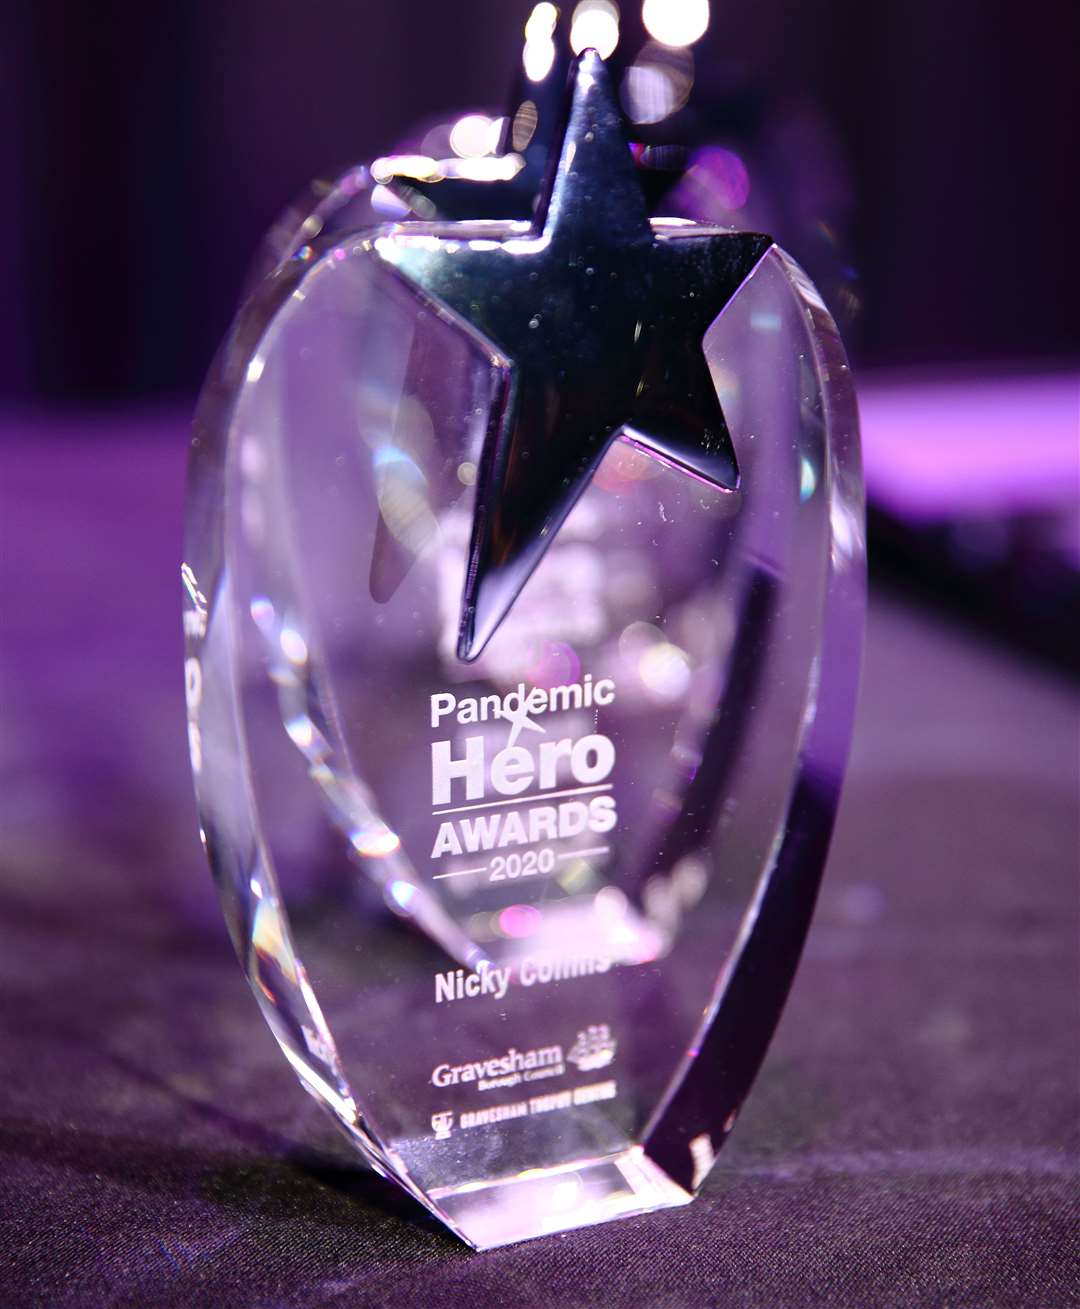 Pandemic hero awards held by Gravesham council